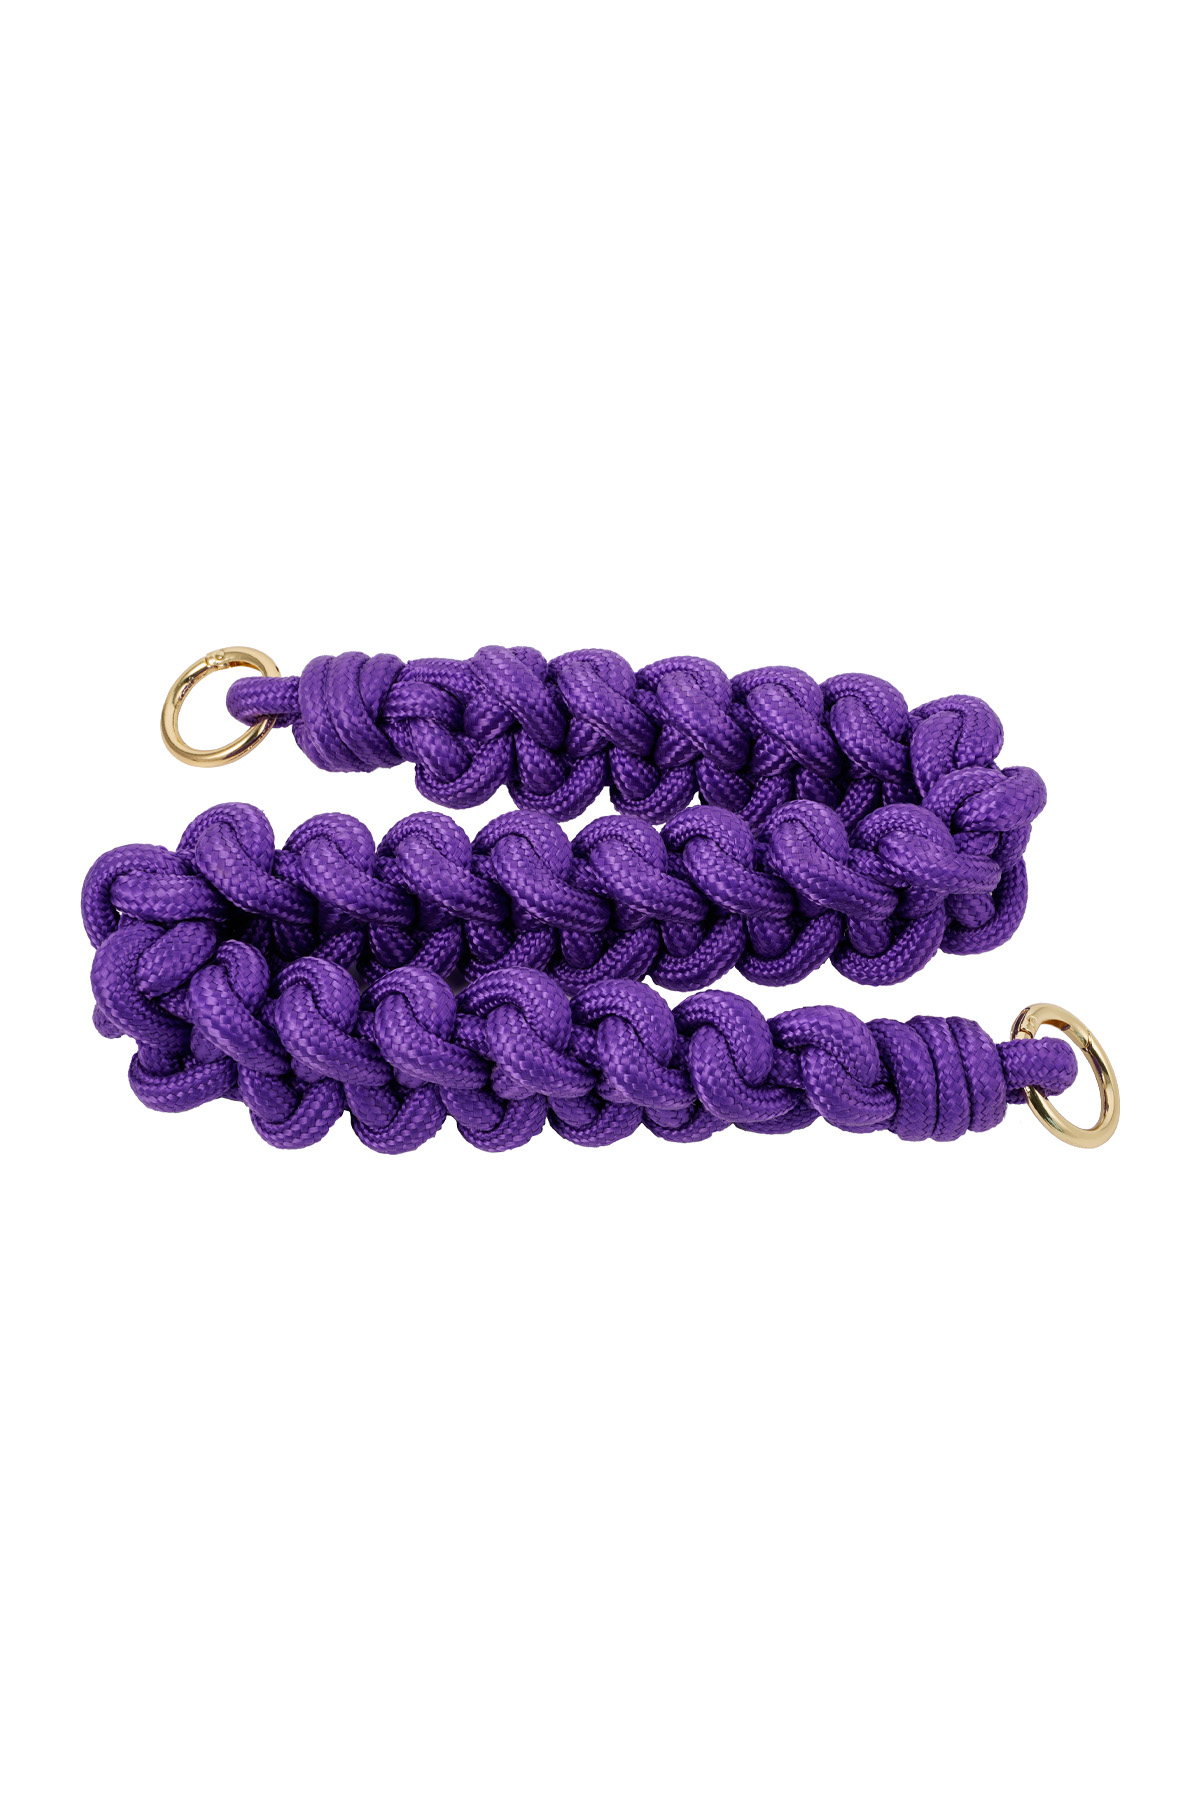 Braided bag strap purple Picture5